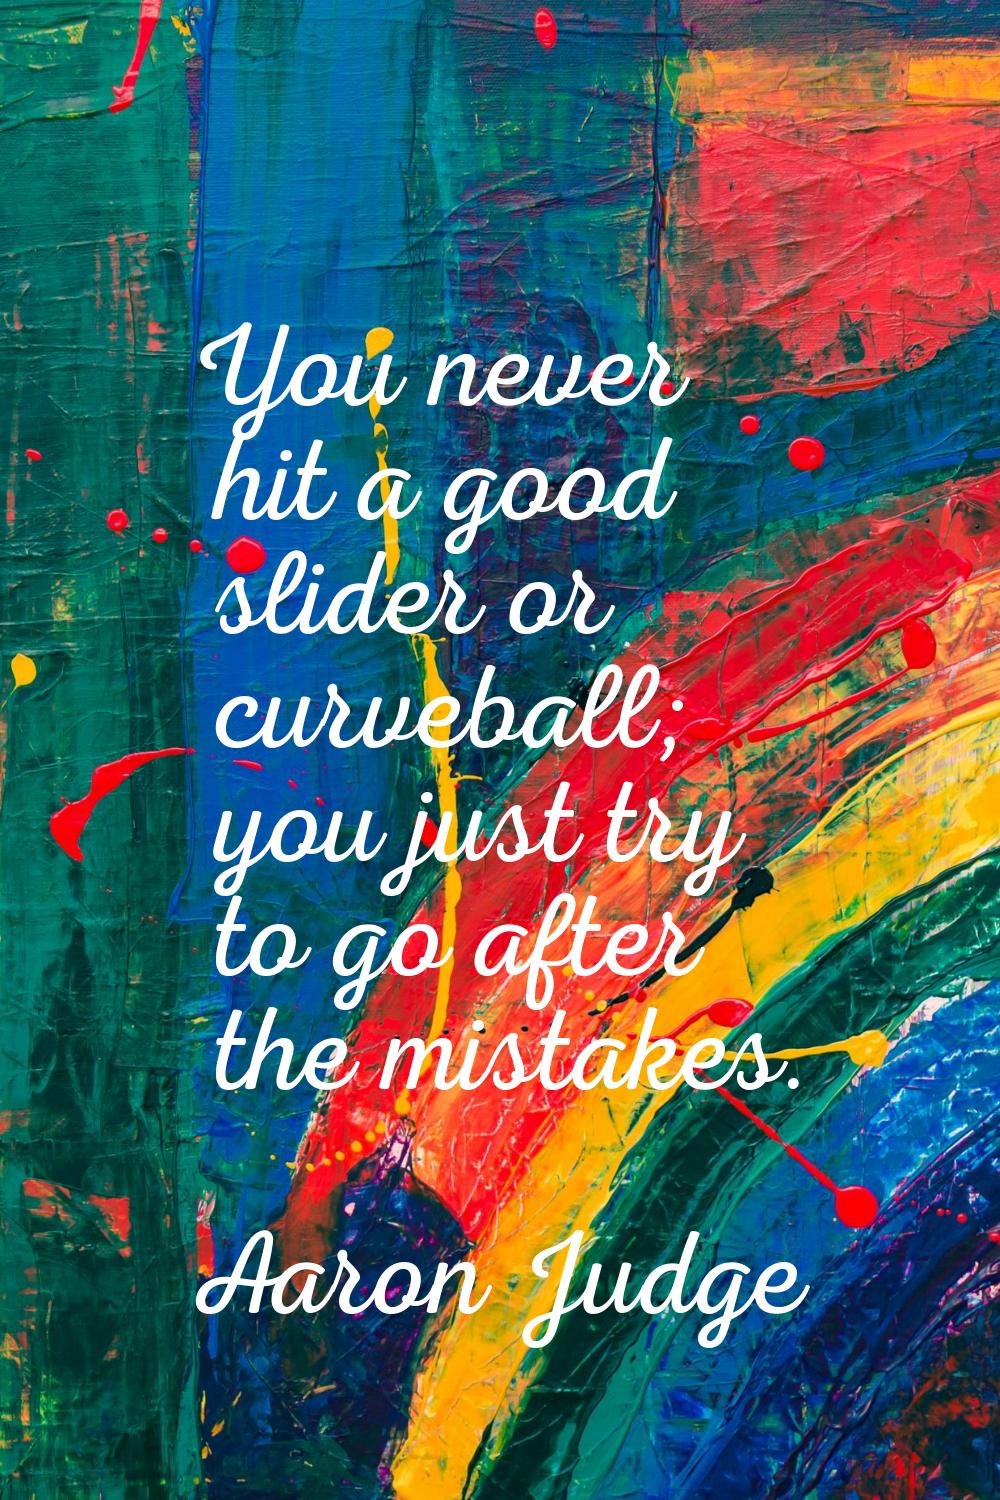 You never hit a good slider or curveball; you just try to go after the mistakes.